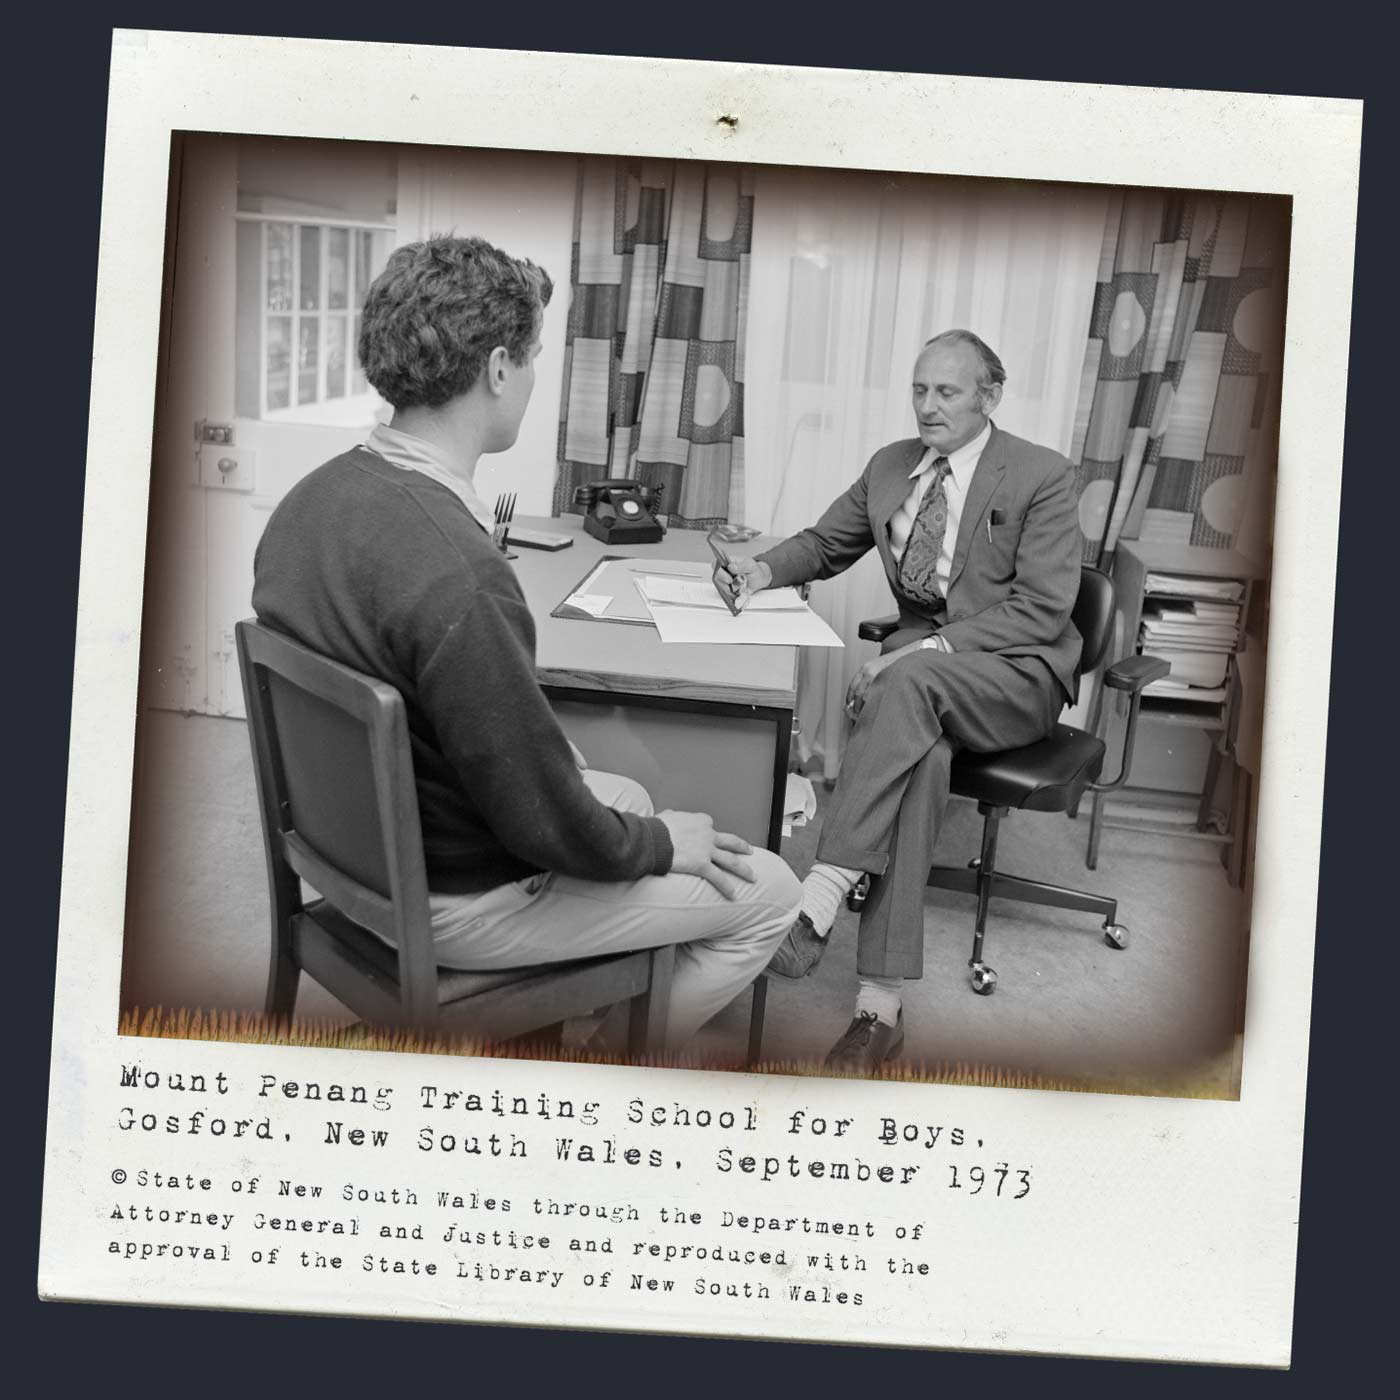 A black and white Polaroid photograph of an older man and someone who appears to be an adolescent boy sitting in an office. The man is dressed in a suit and tie and has his left leg crossed over his right. He is holding a pen and looking at a document on his desk. The boy is seated facing him with his right hand placed above his knee. He appears to be wearing a dark coloured jumper and light coloured trousers. Typewritten text underneath reads 'Mount Penang Training School for Boys, Gosford, New South Wales, September 1973.' Below this text is the circle c copyright symbol followed by 'State of New South Wales through the Department of Attorney General and Justice and reproduced with the approval of the State Library of New South Wales.' - click to view larger image